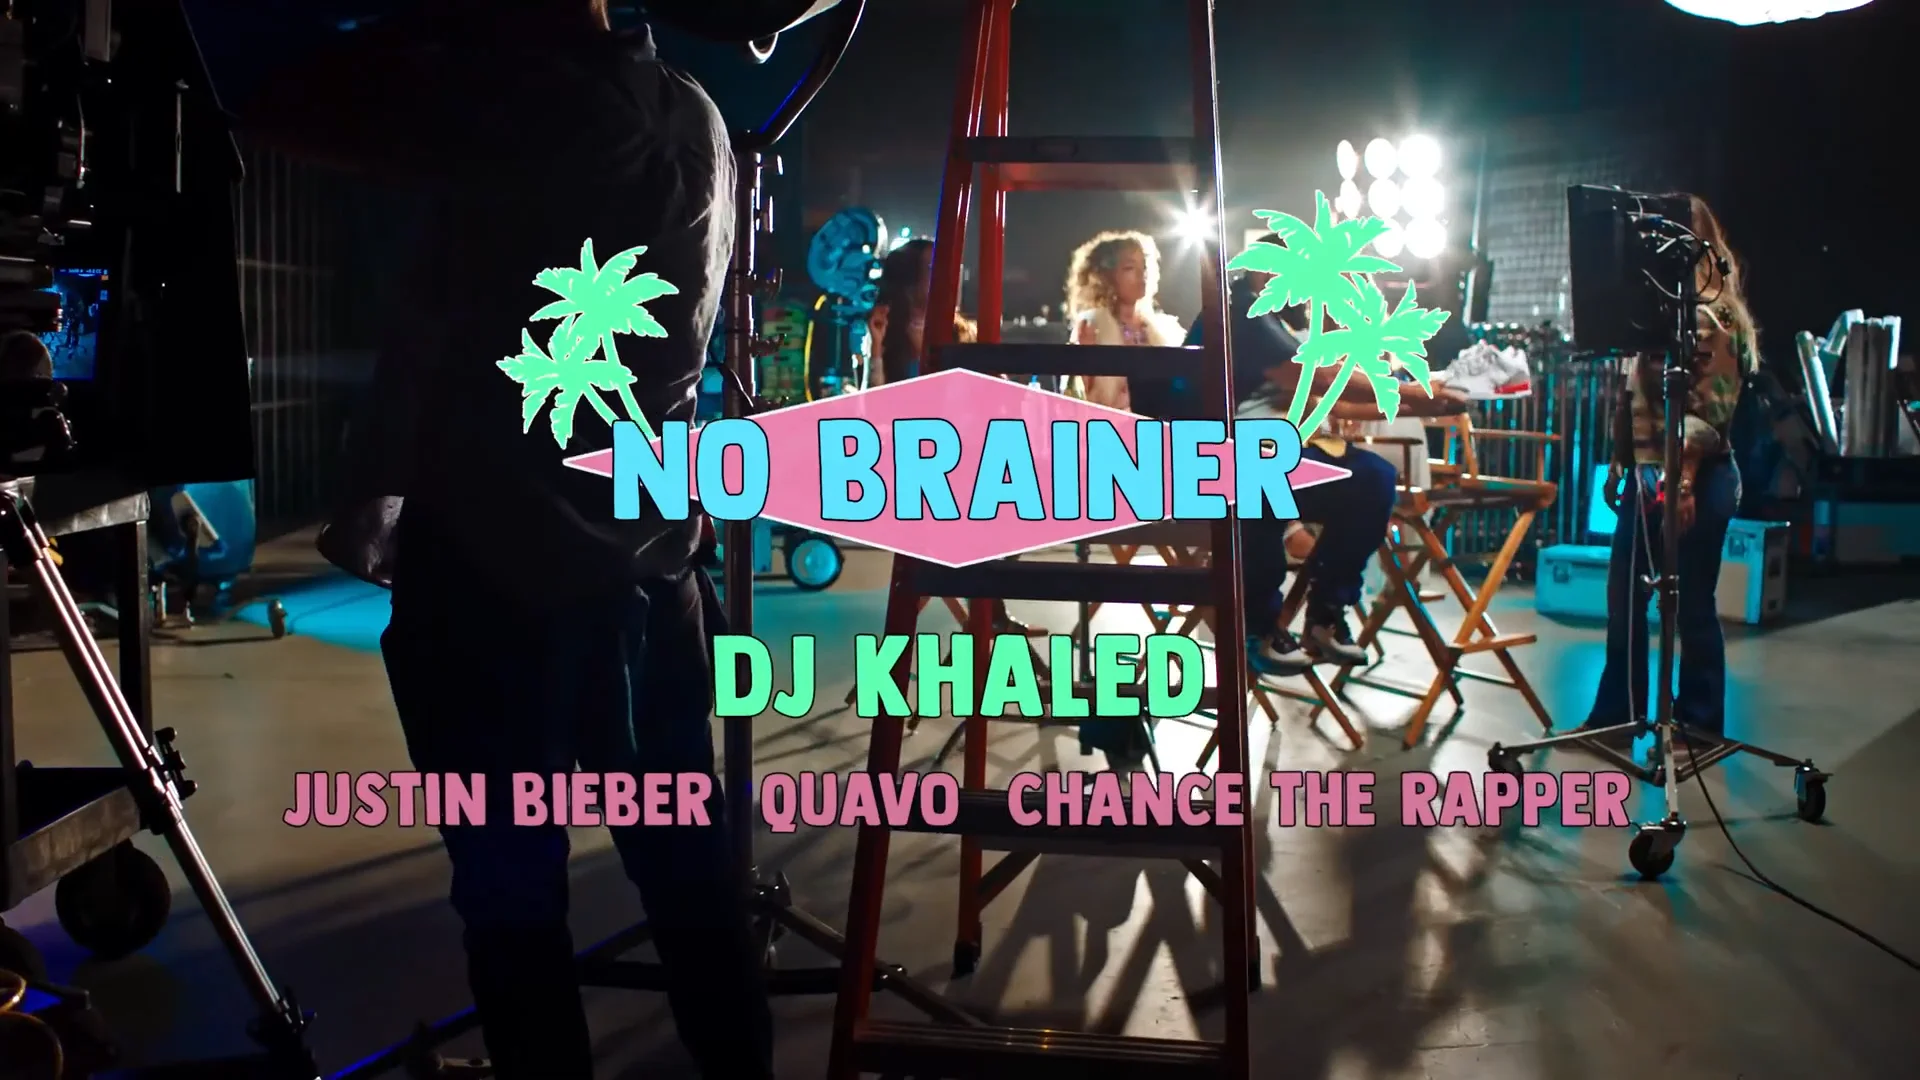 Dj Khaled - No Brainer - ft.Justin Bieber, Quavo and Chance The Rapper  (Official Music Video) on Vimeo